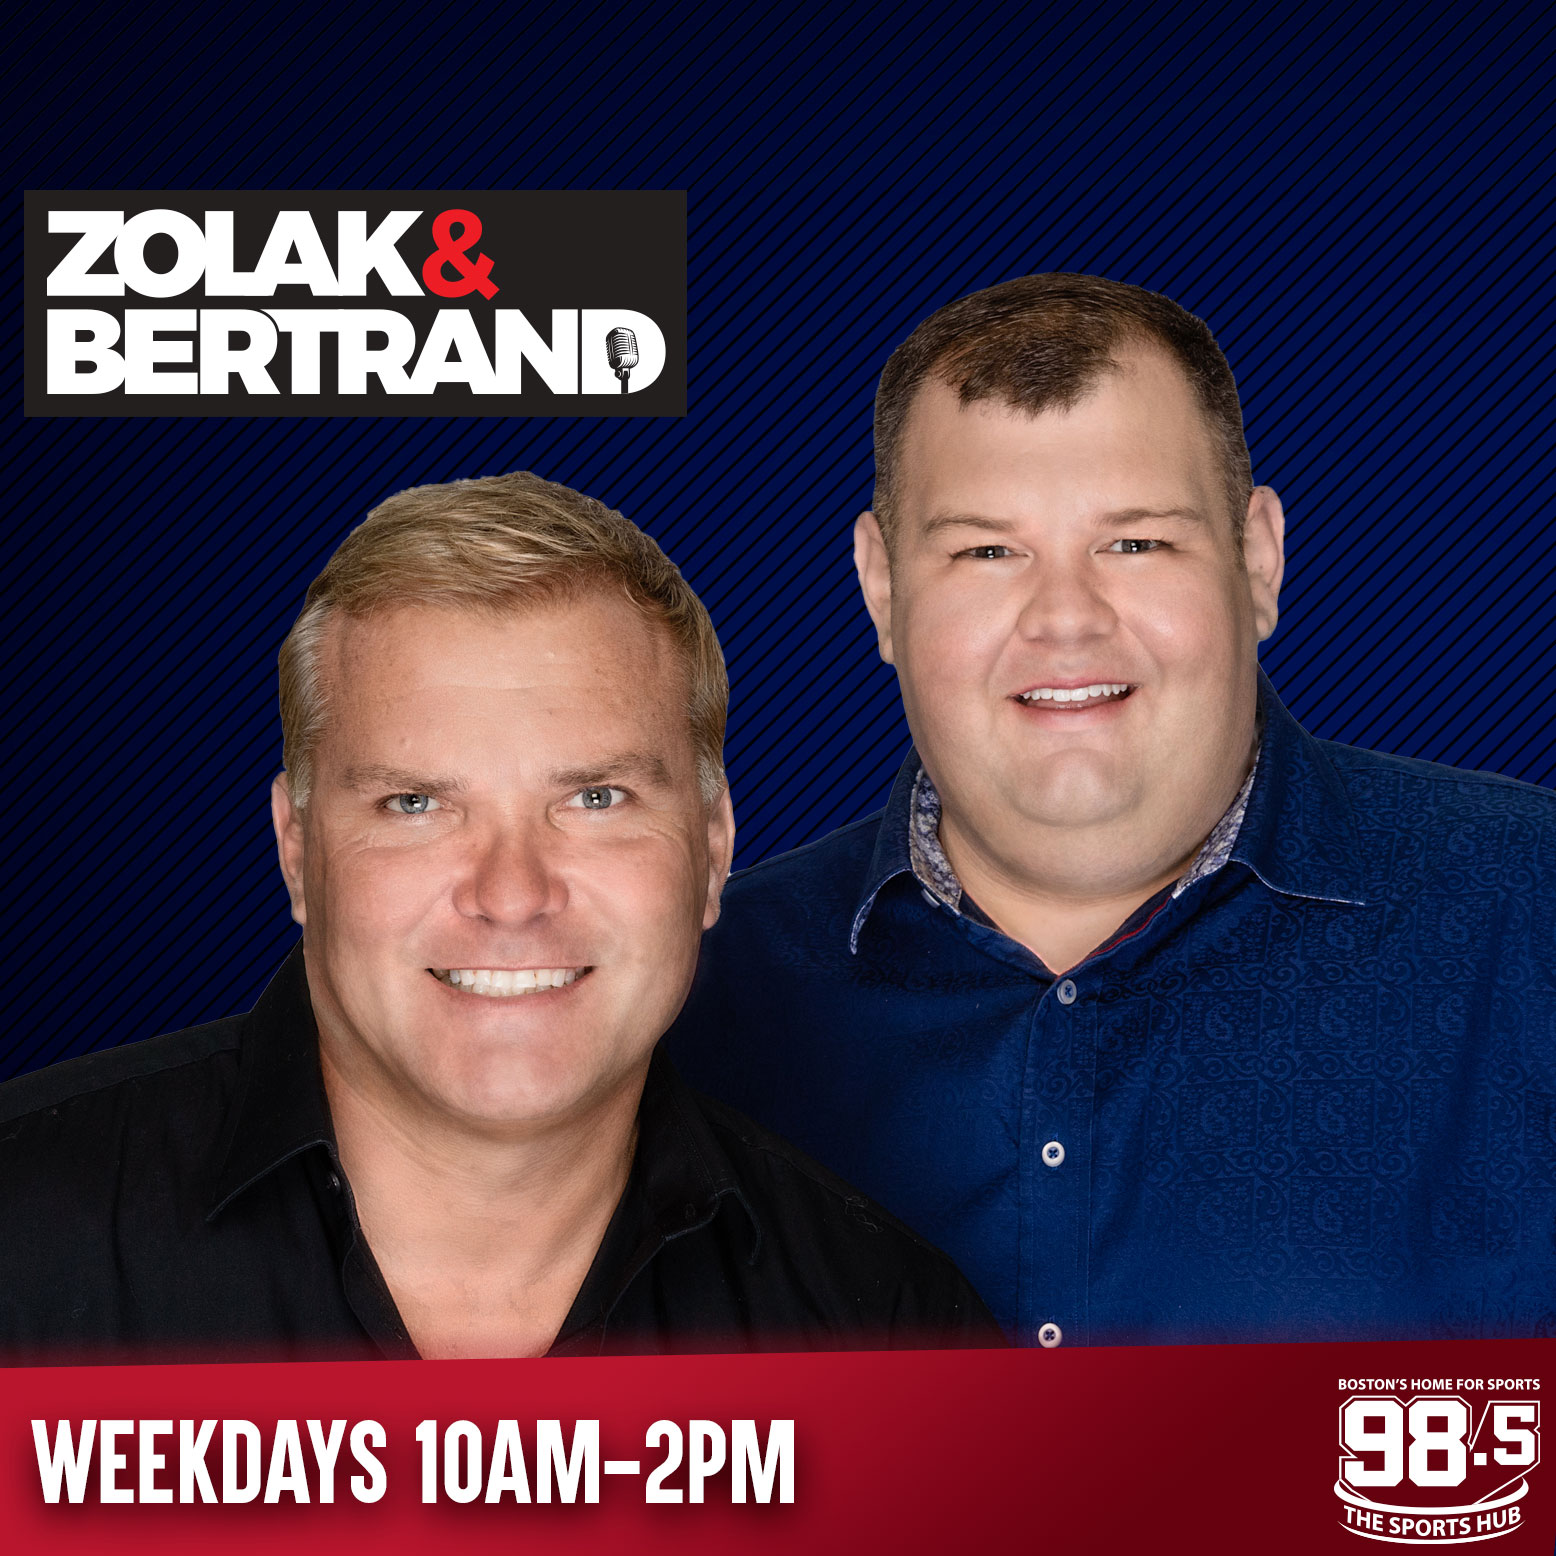 Zolak & Bertrand: Is there collusion going on with Lamar Jackson?